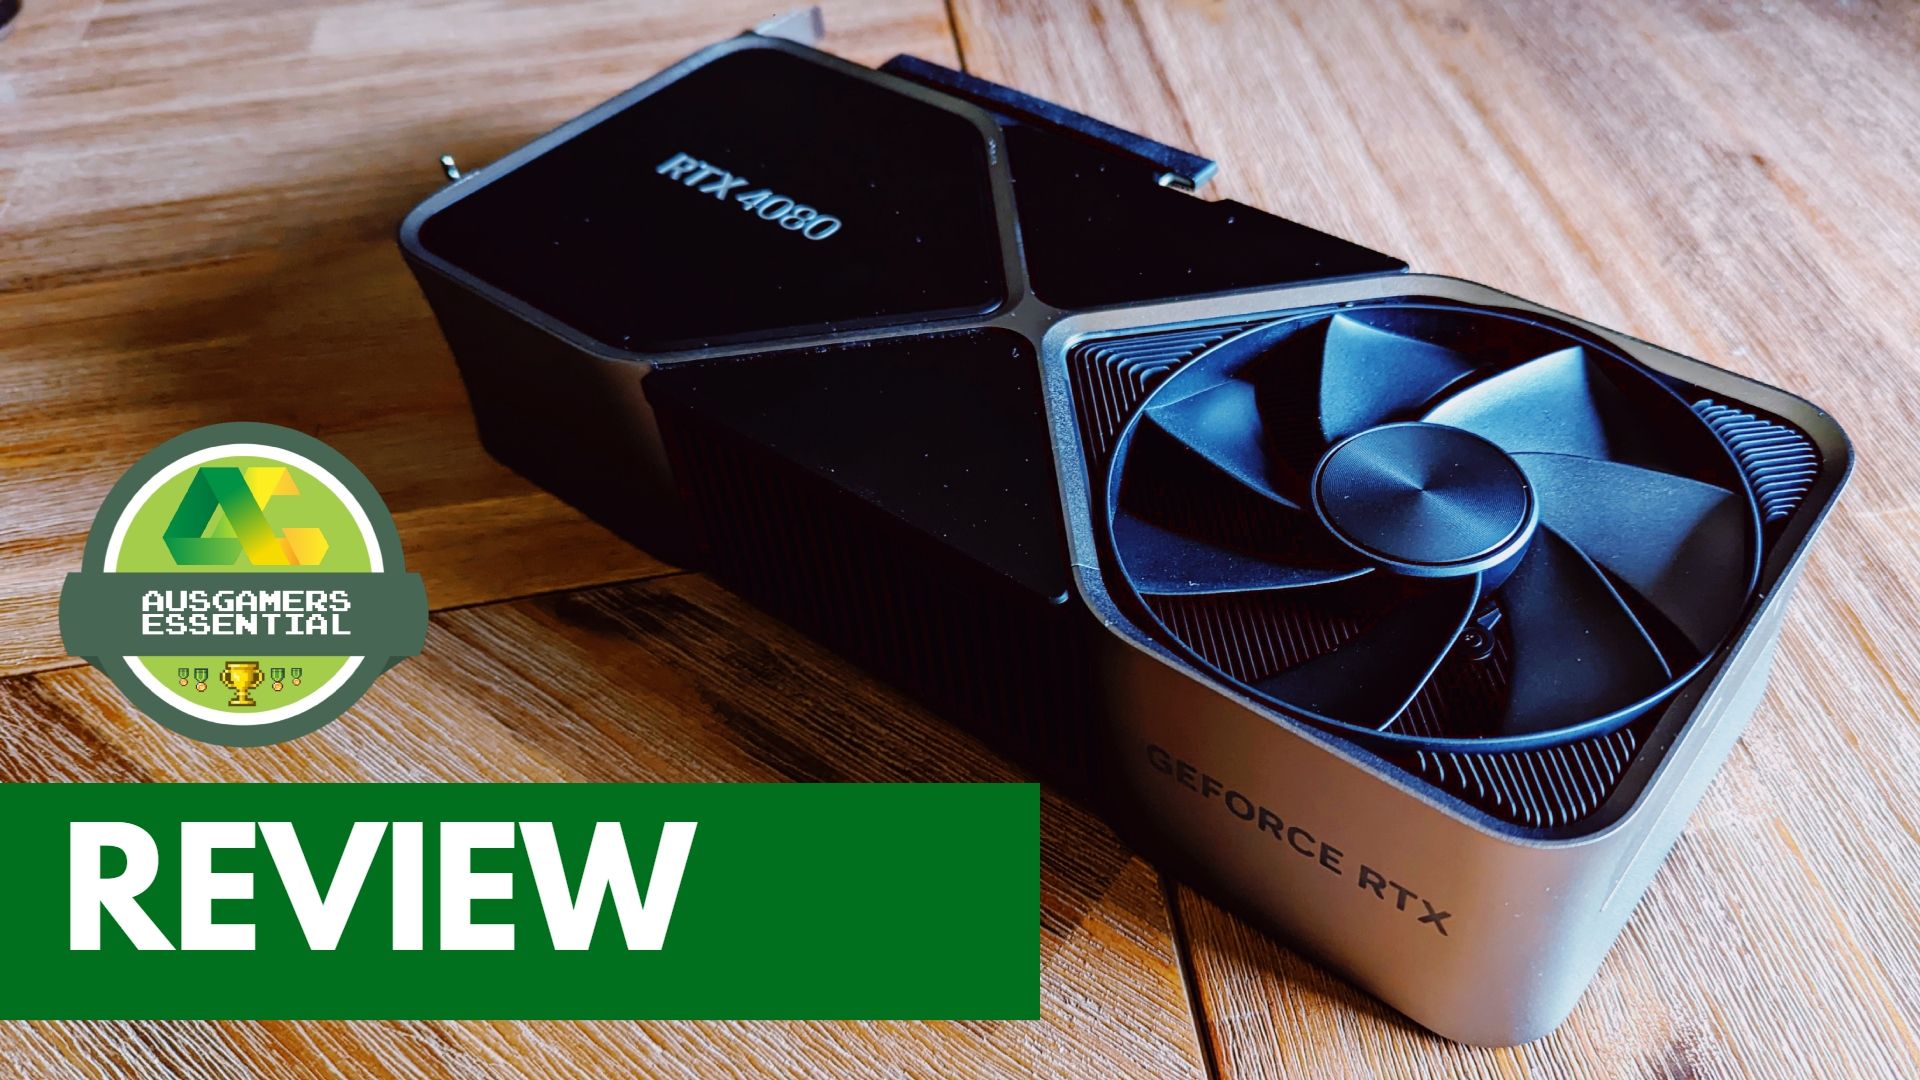 Nvidia GeForce RTX 4080 Founders Edition Review: 4K performance